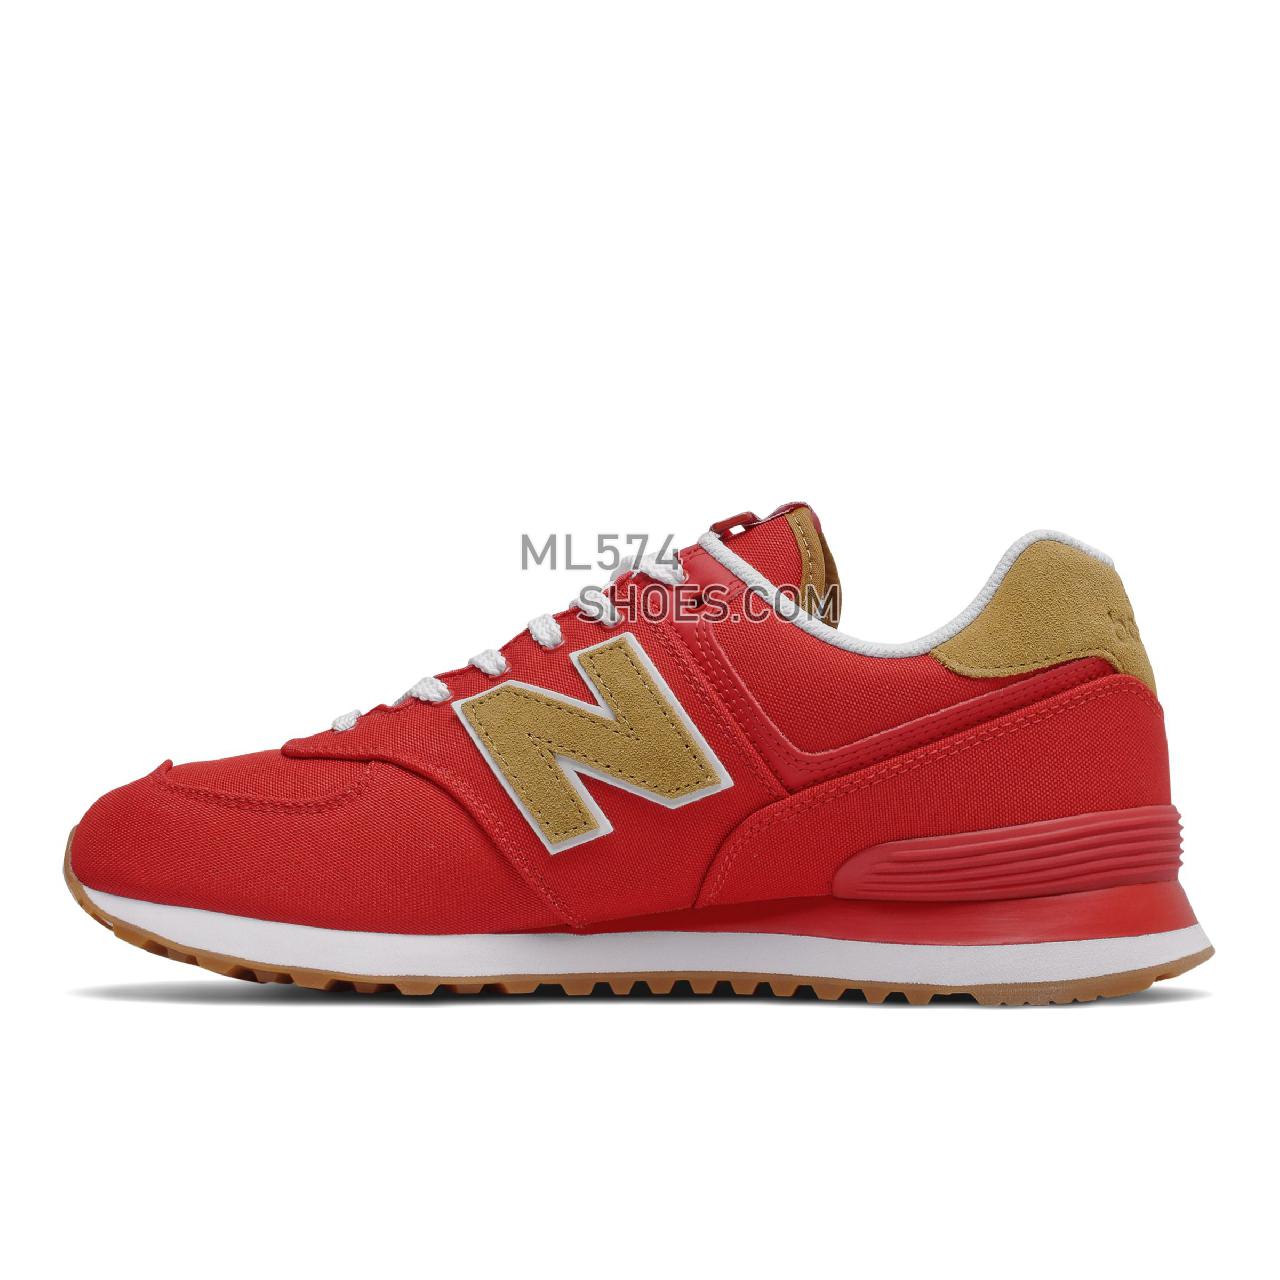 New Balance 574v2 - Men's Classic Sneakers - Team Red with Workwear - ML574BN2